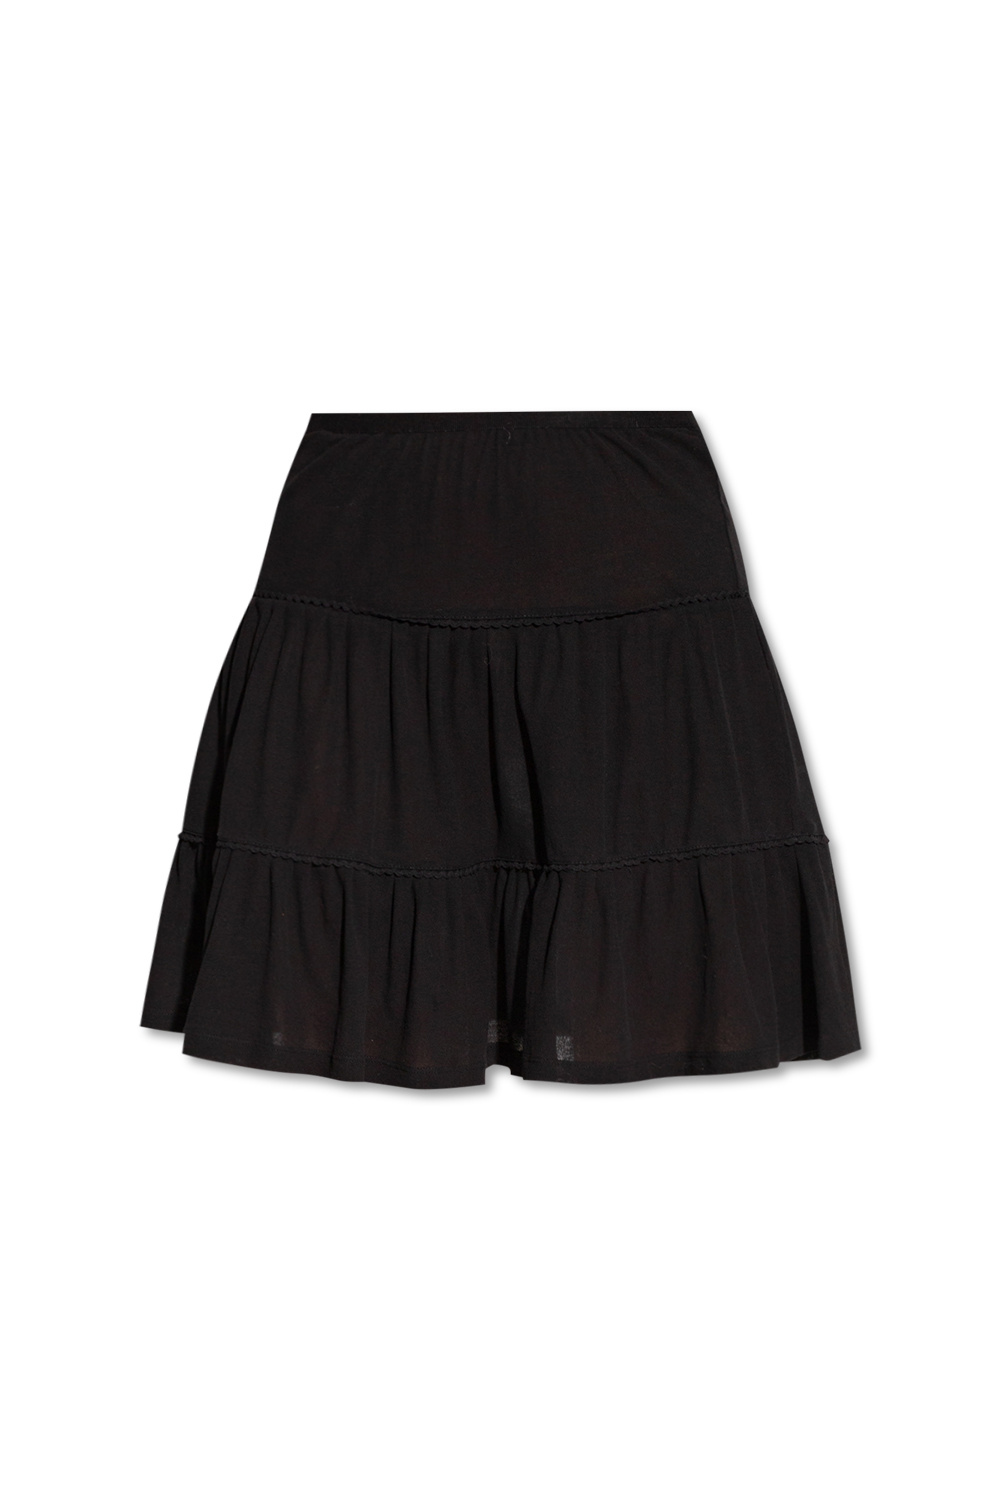 See By Chloe Cotton skirt